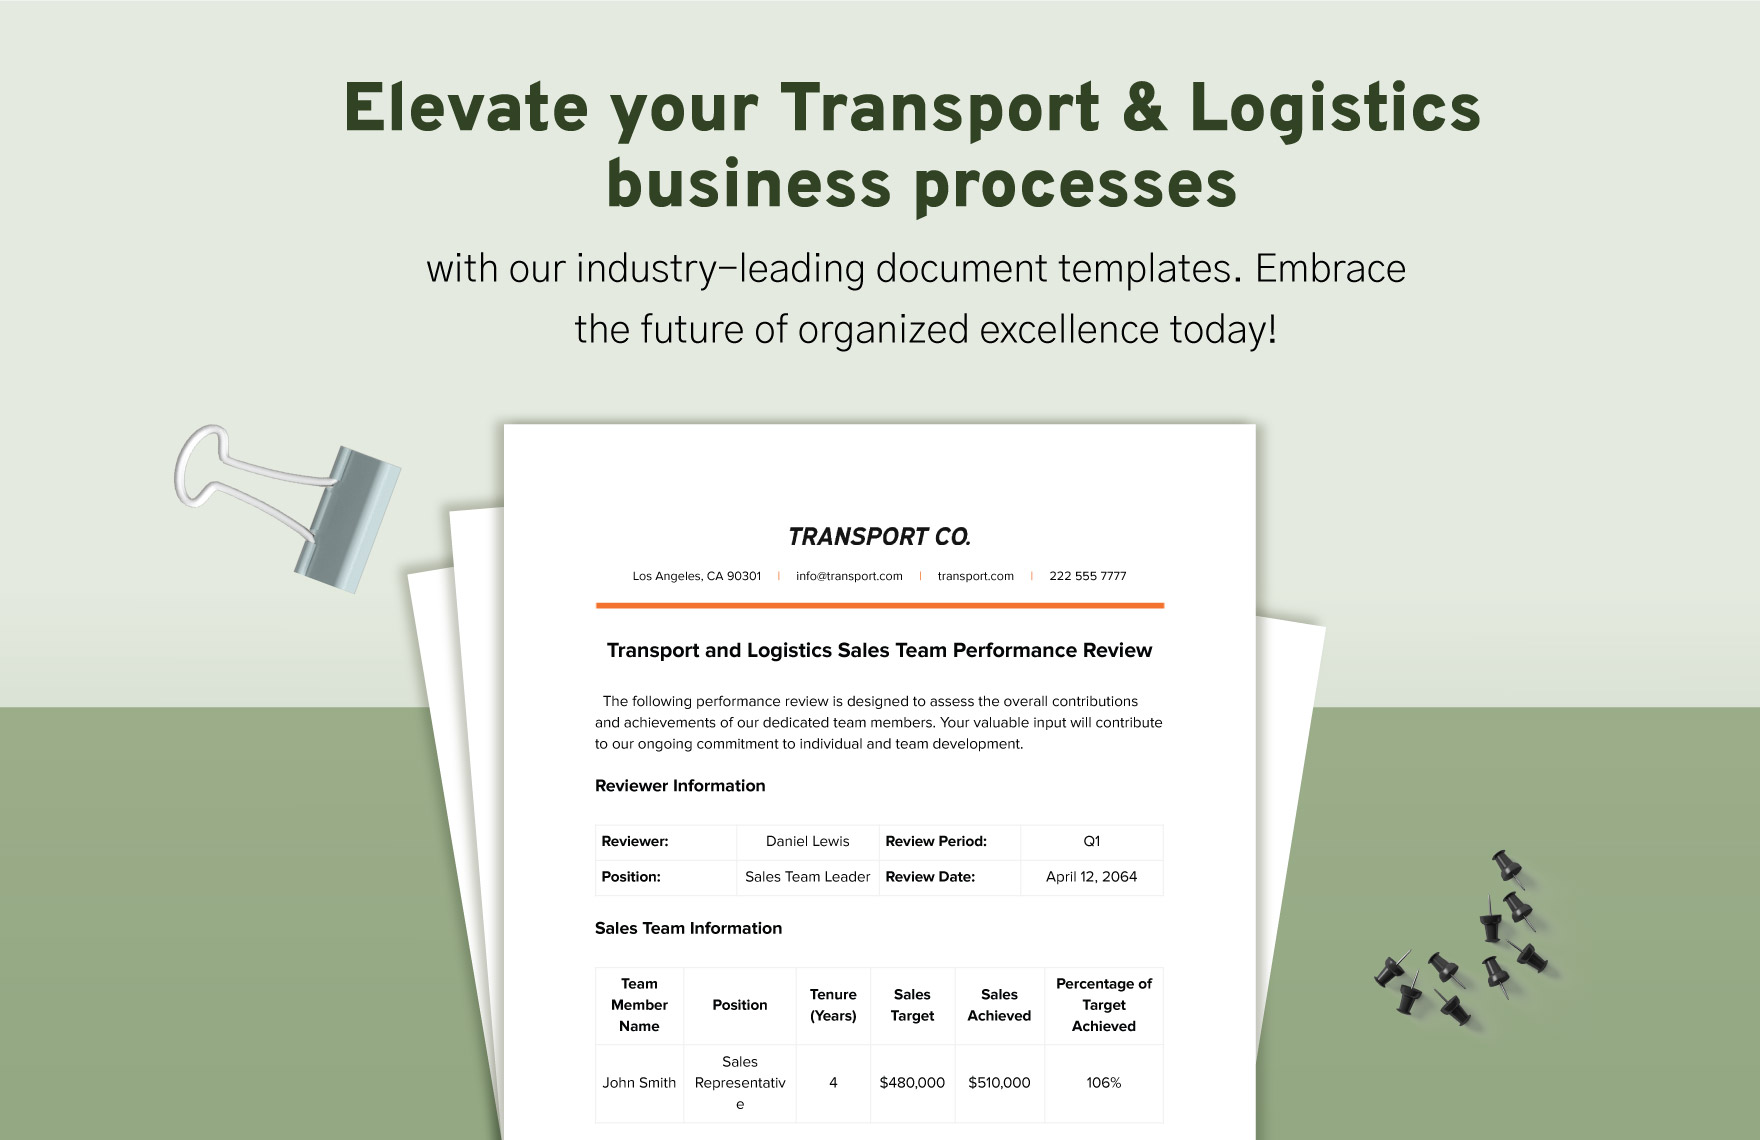 Transport and Logistics Sales Team Performance Review Template